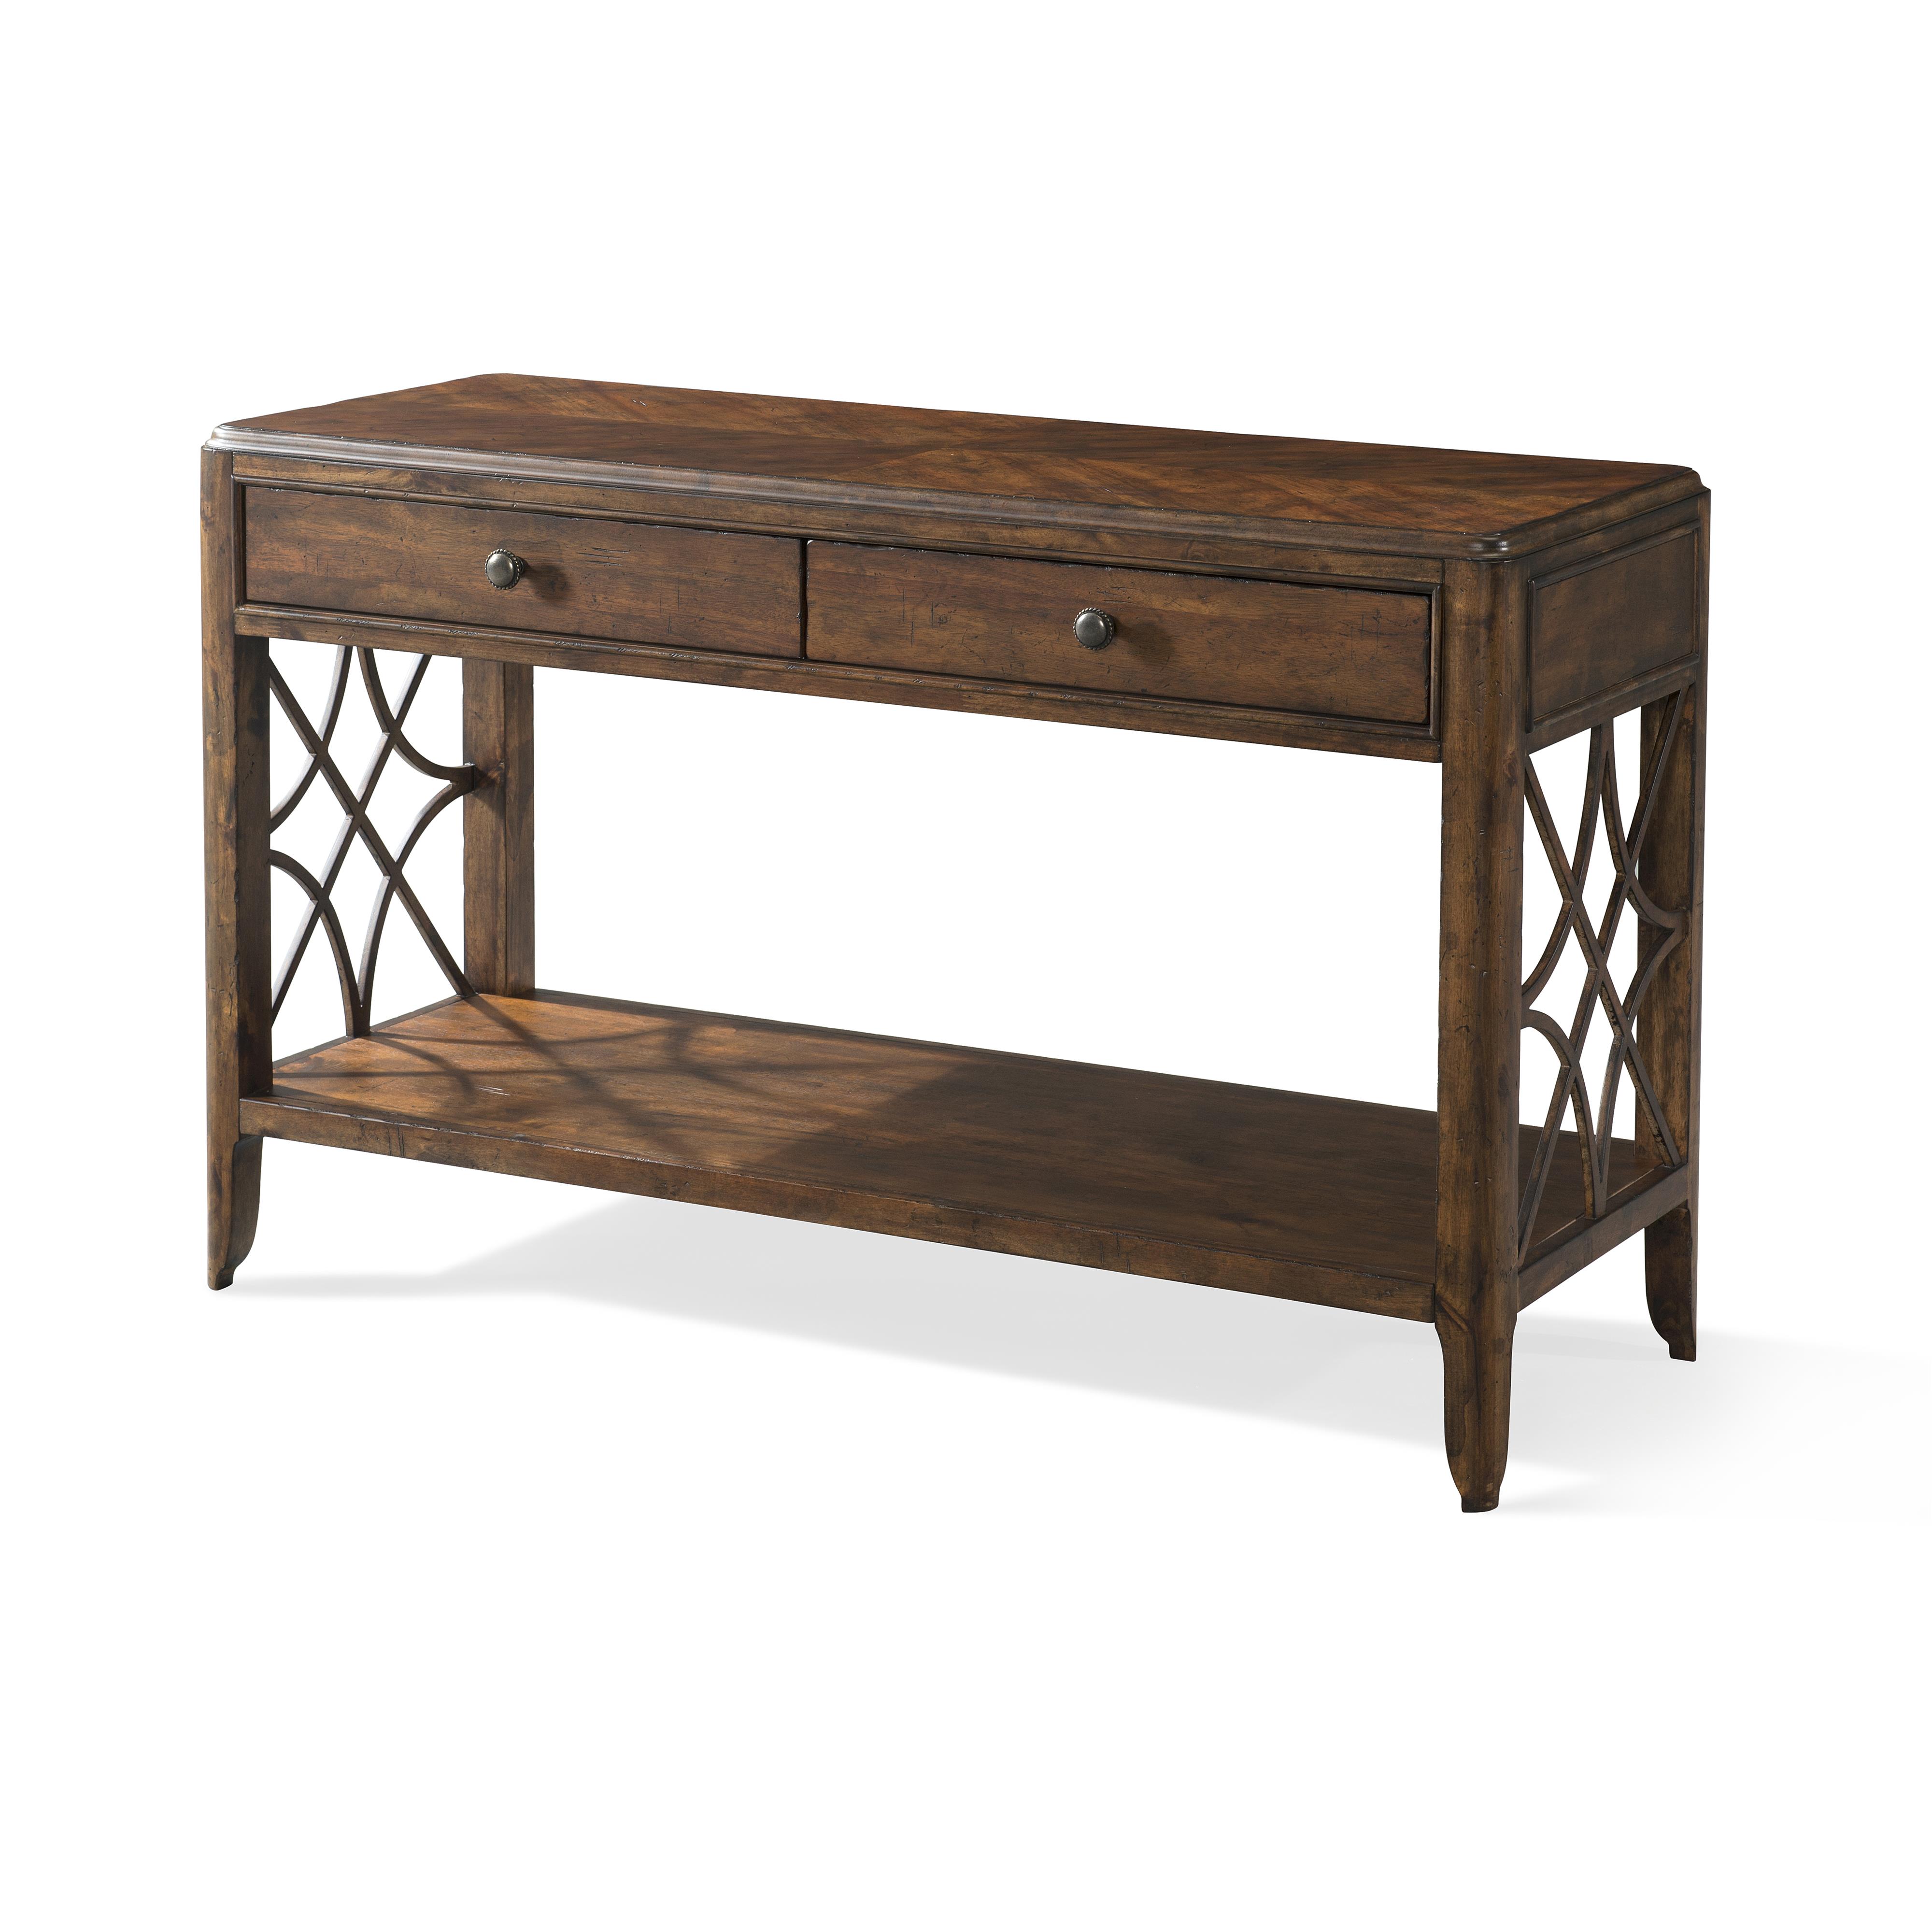 trisha yearwood home collection klaussner products color stbl threshold accent table espresso rain drawer sofa white and wood nest tables round granite top coffee industrial end